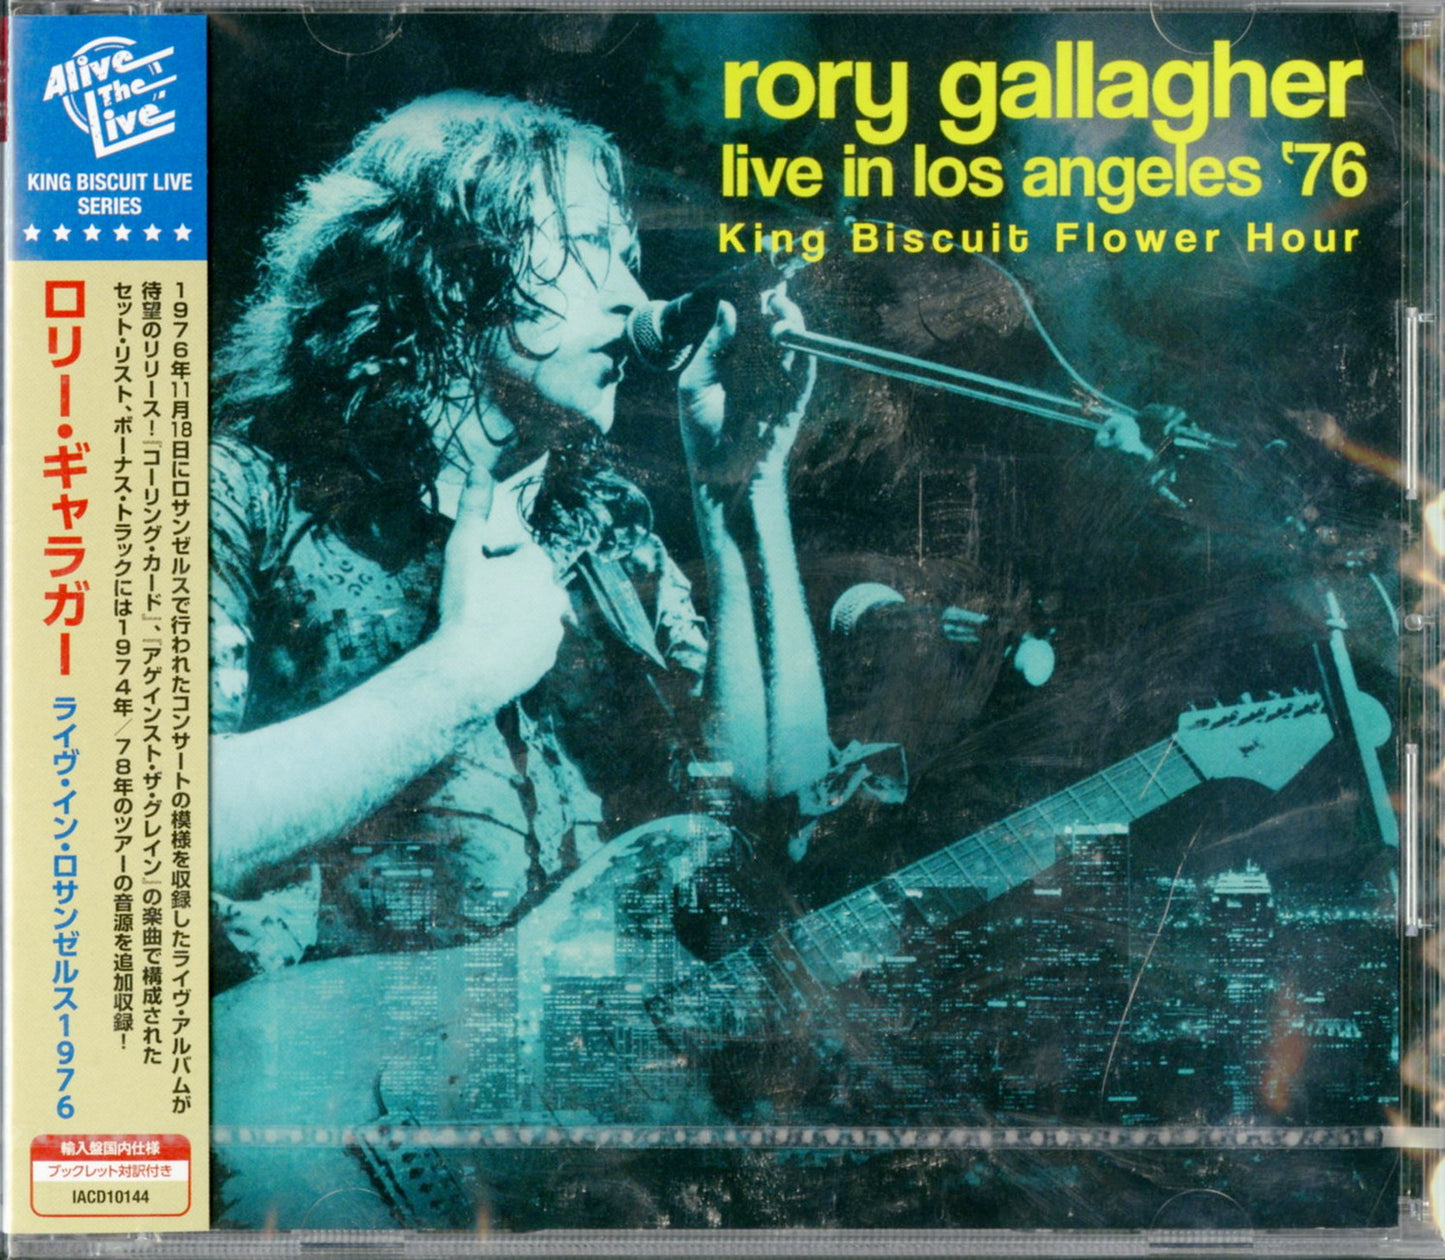 Rory Gallagher - Live In Los Angeles '76 King Biscuit Flower Hour - Import CD